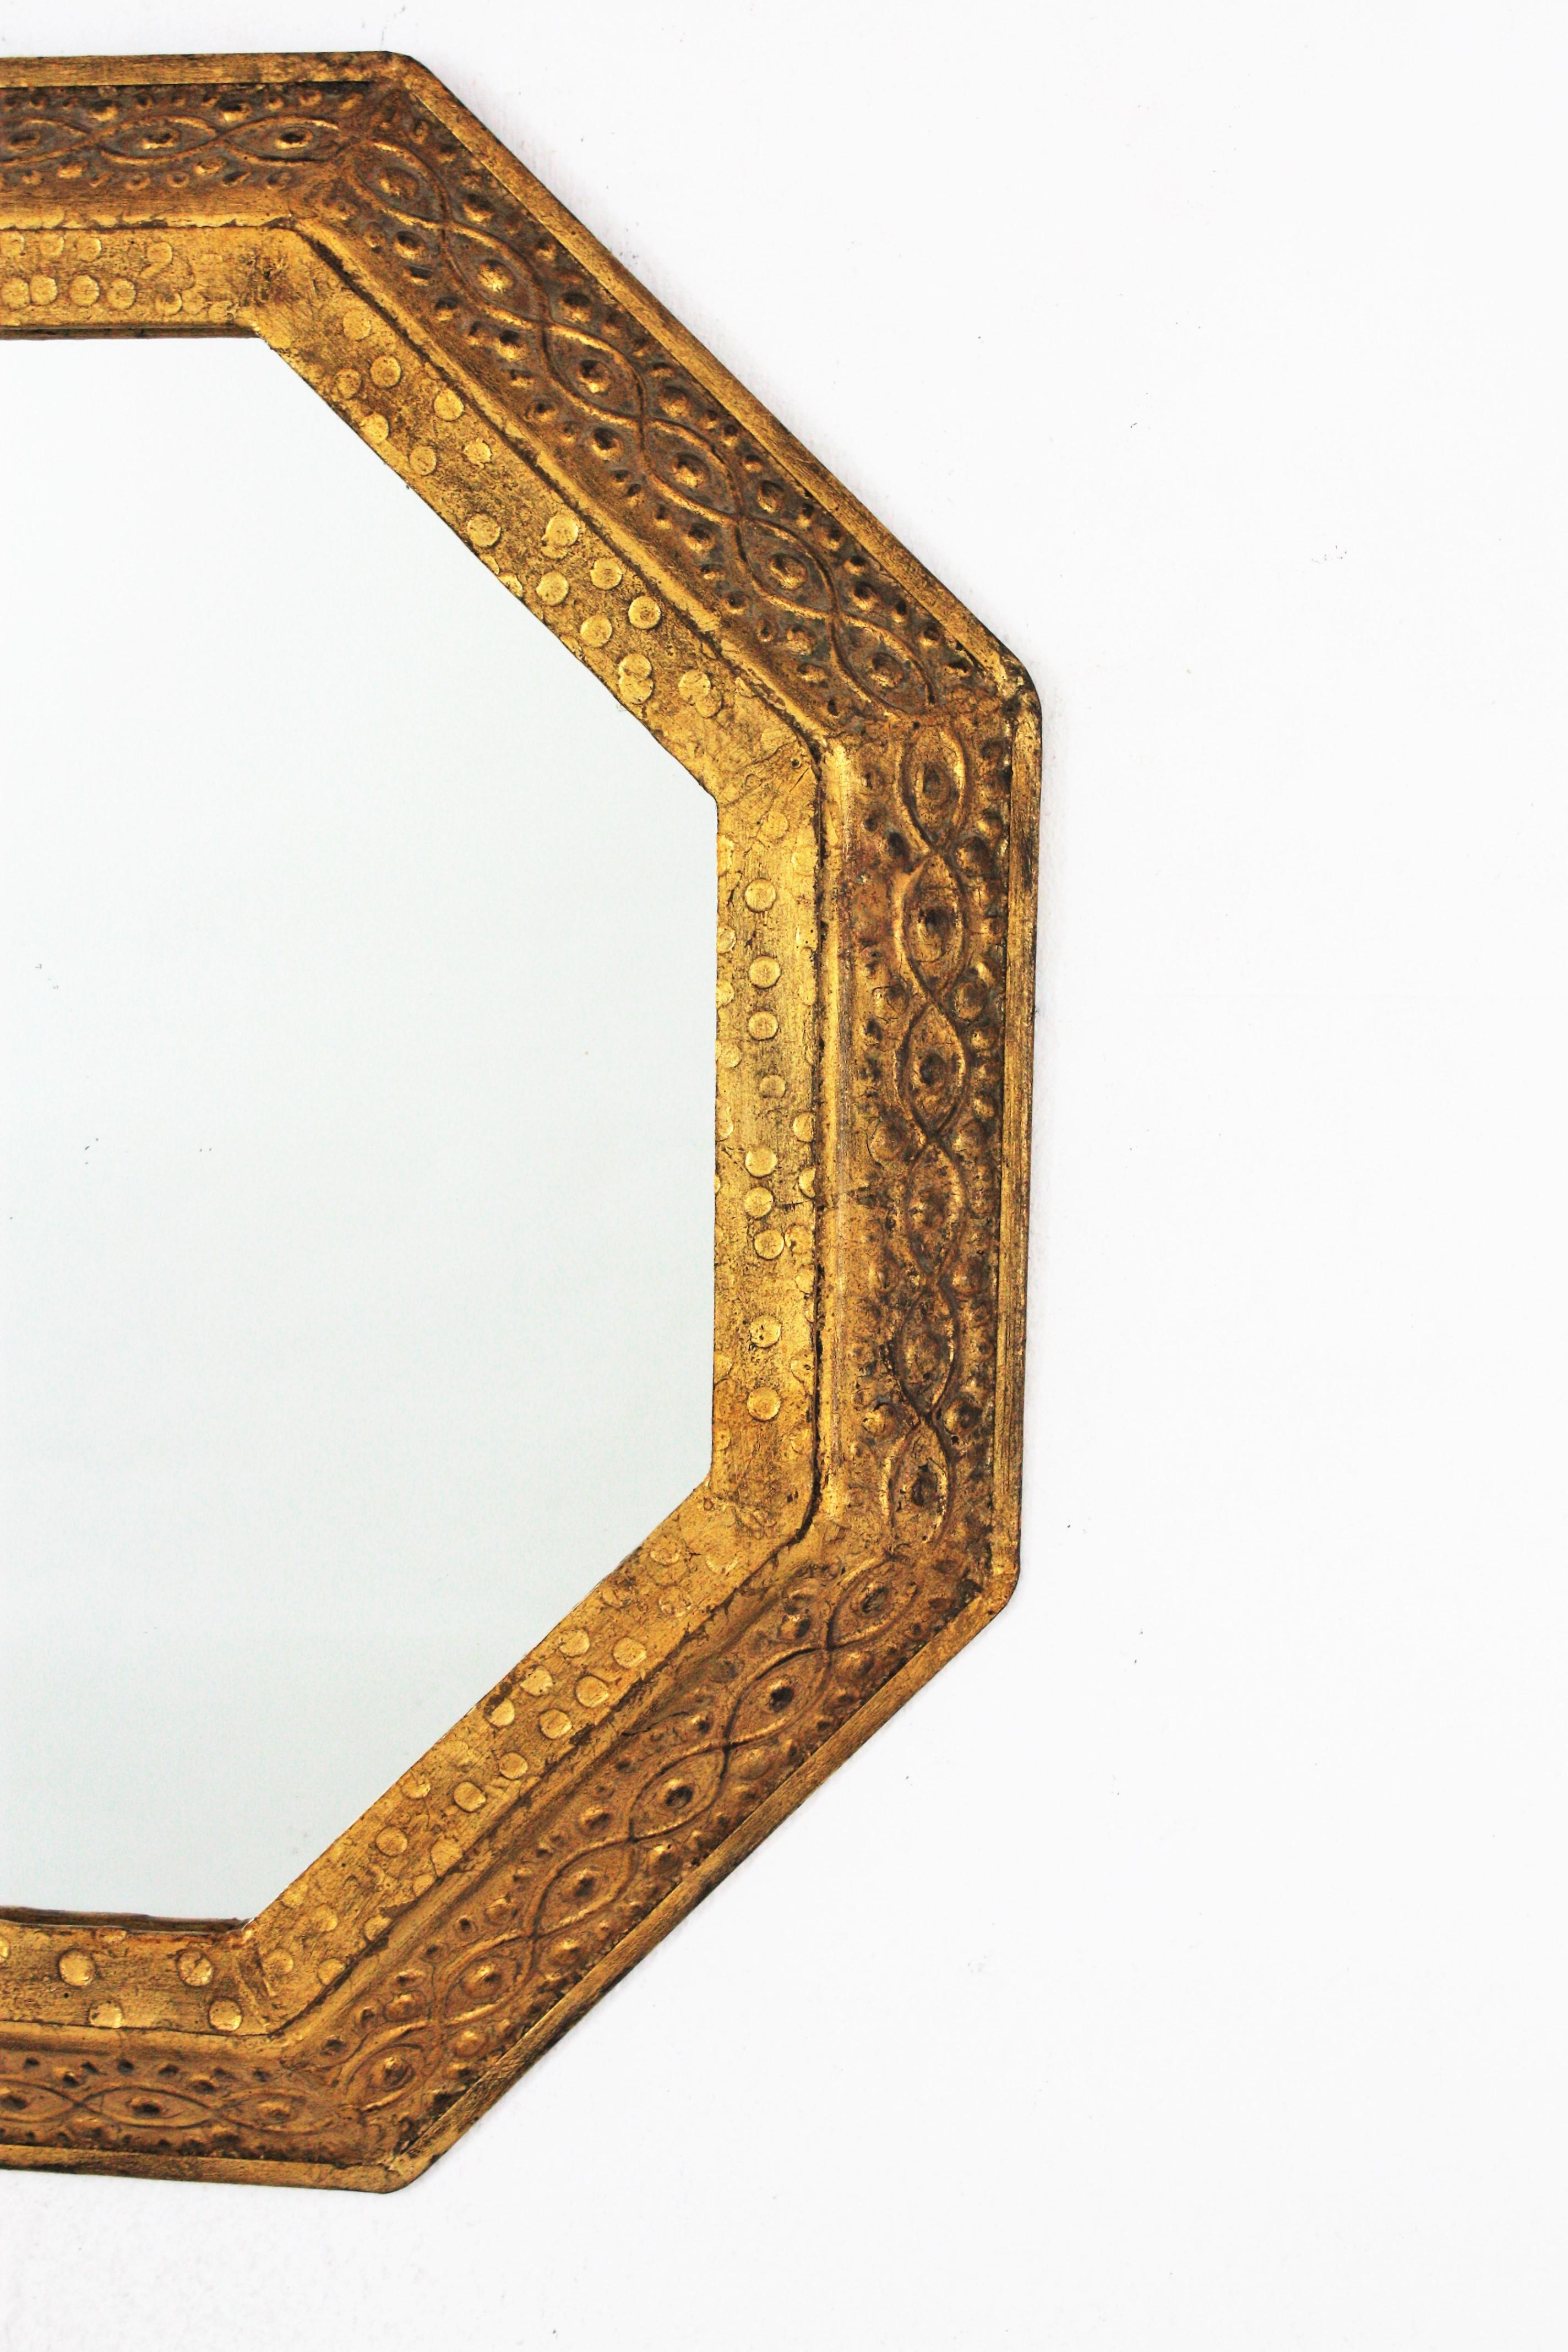 20th Century Spanish Octagonal Mirror in Repousse Gilt Iron by Ferro Art, 1950s For Sale